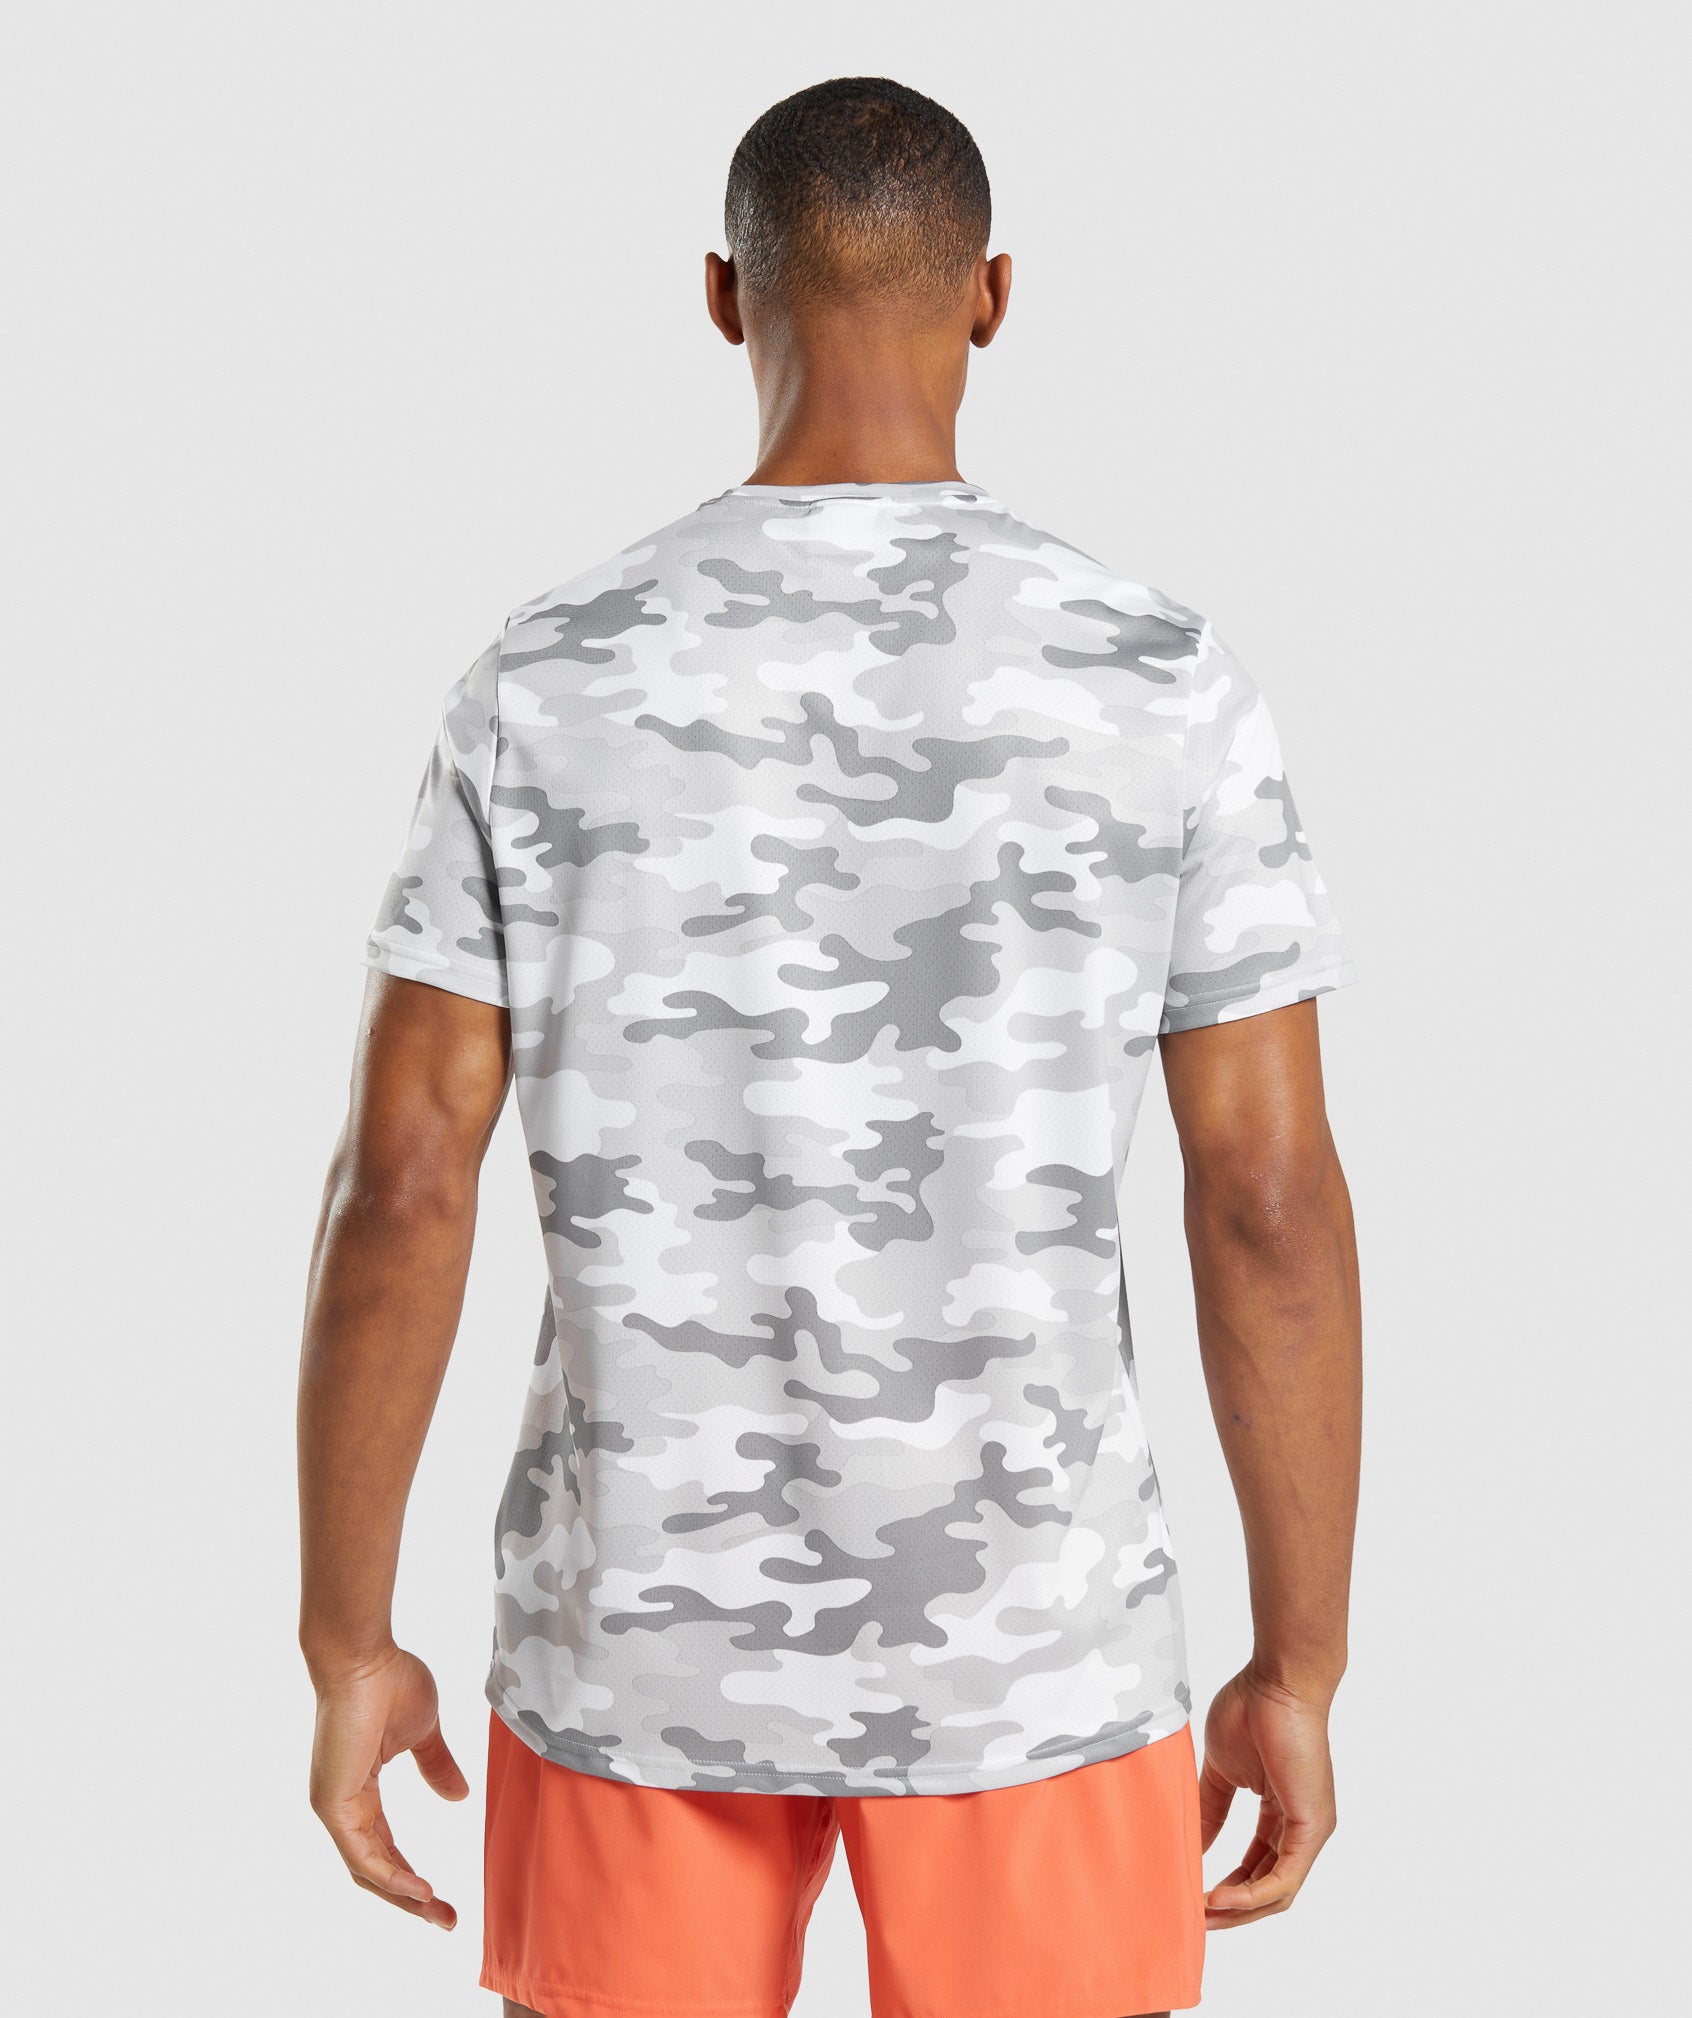 Arrival T-Shirt in Light Grey Print - view 3